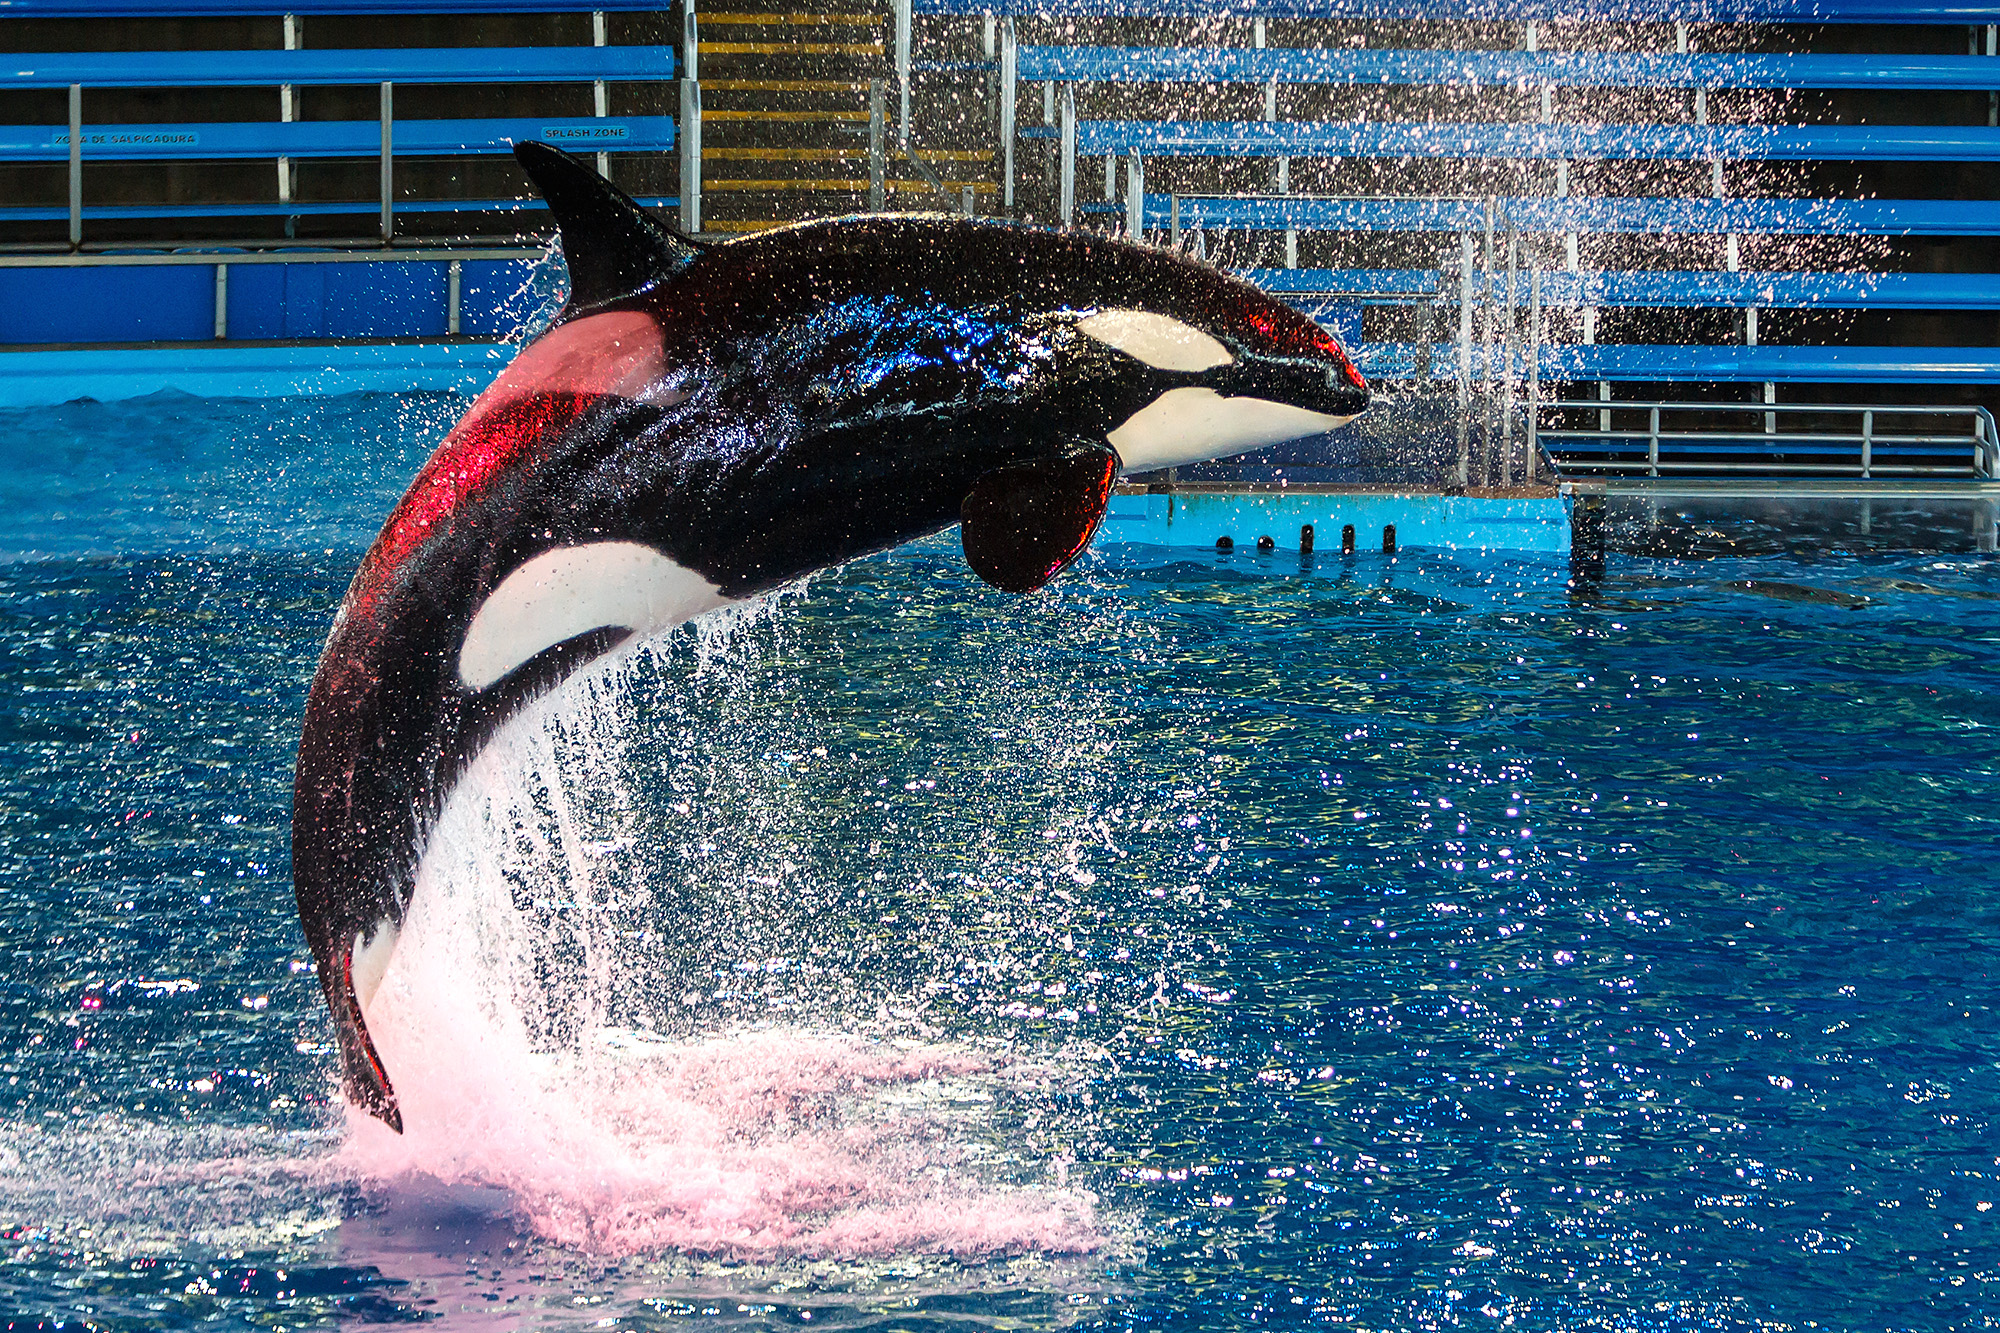 Texas resident sues SeaWorld in S.A. federal court